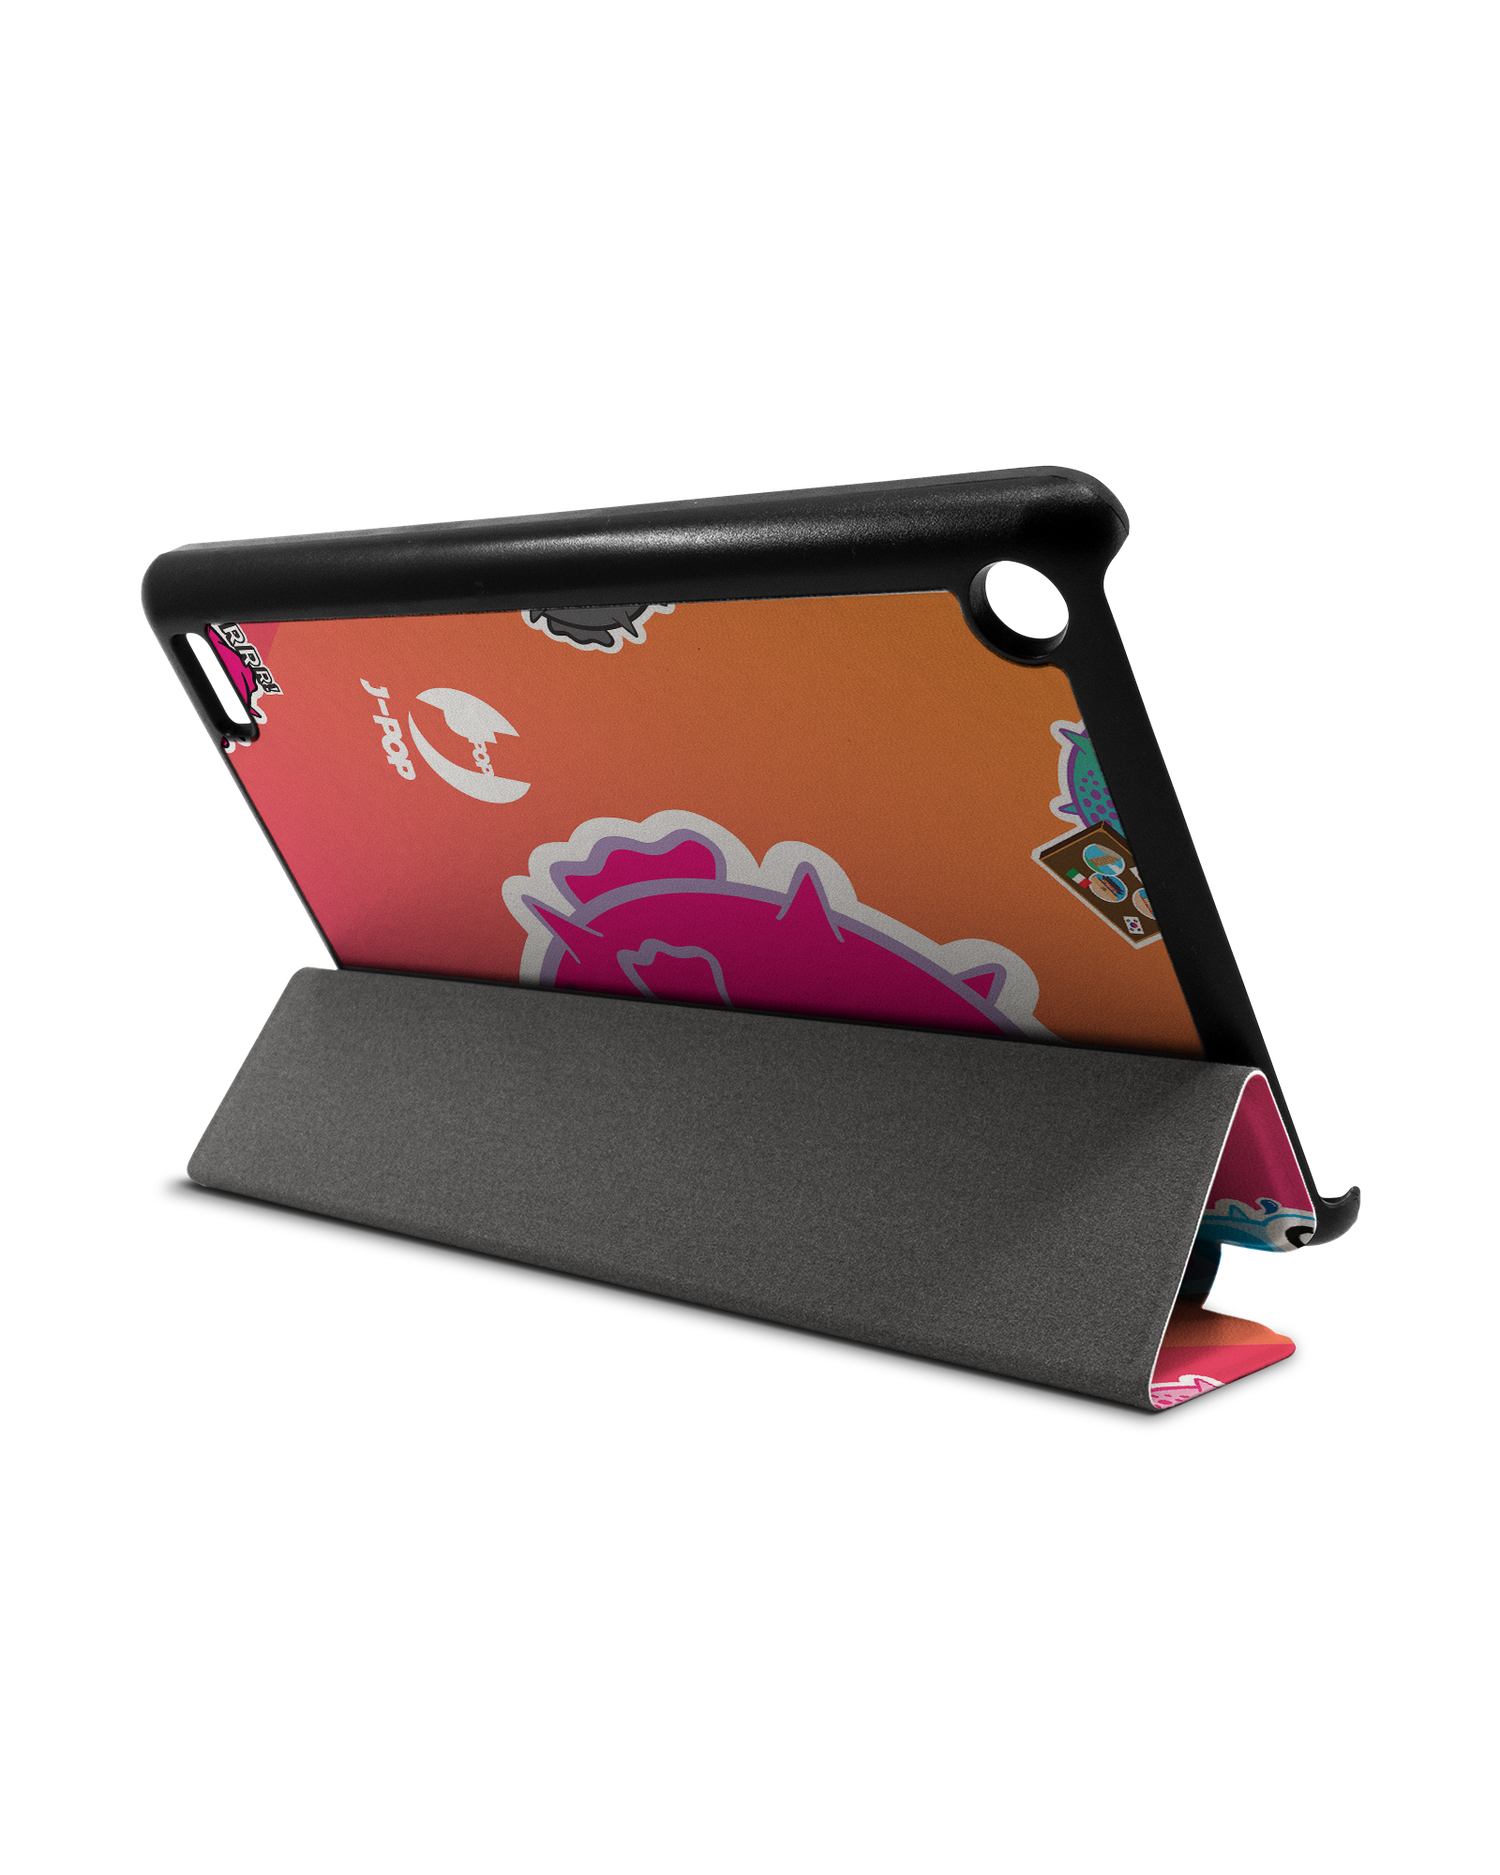 Fugus! Tablet Smart Case for Amazon Fire 7: Used as Stand